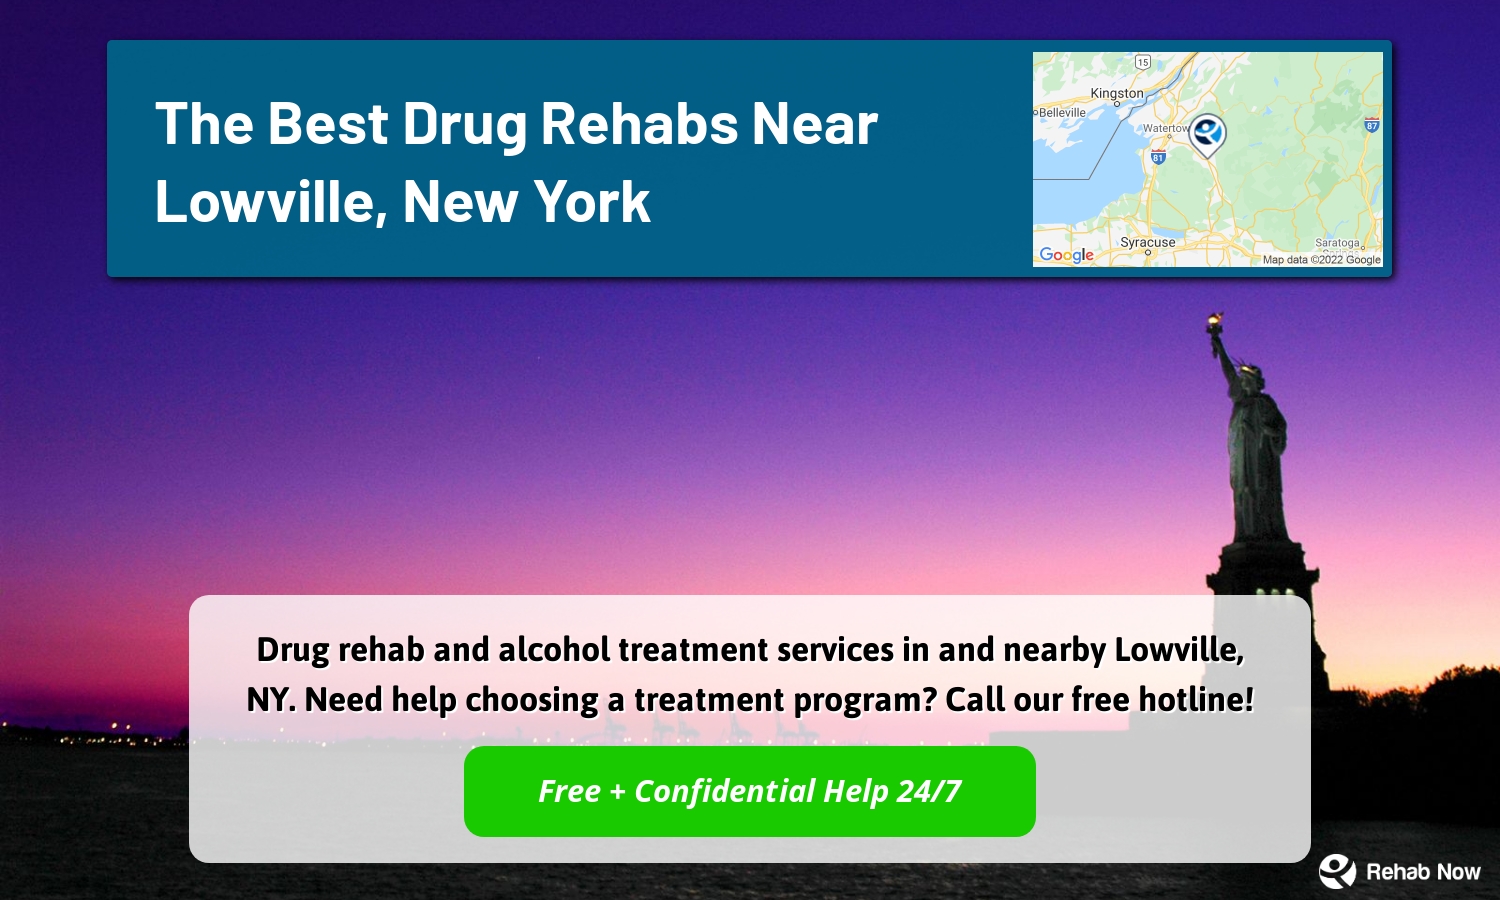 Drug rehab and alcohol treatment services in and nearby Lowville, NY. Need help choosing a treatment program? Call our free hotline!